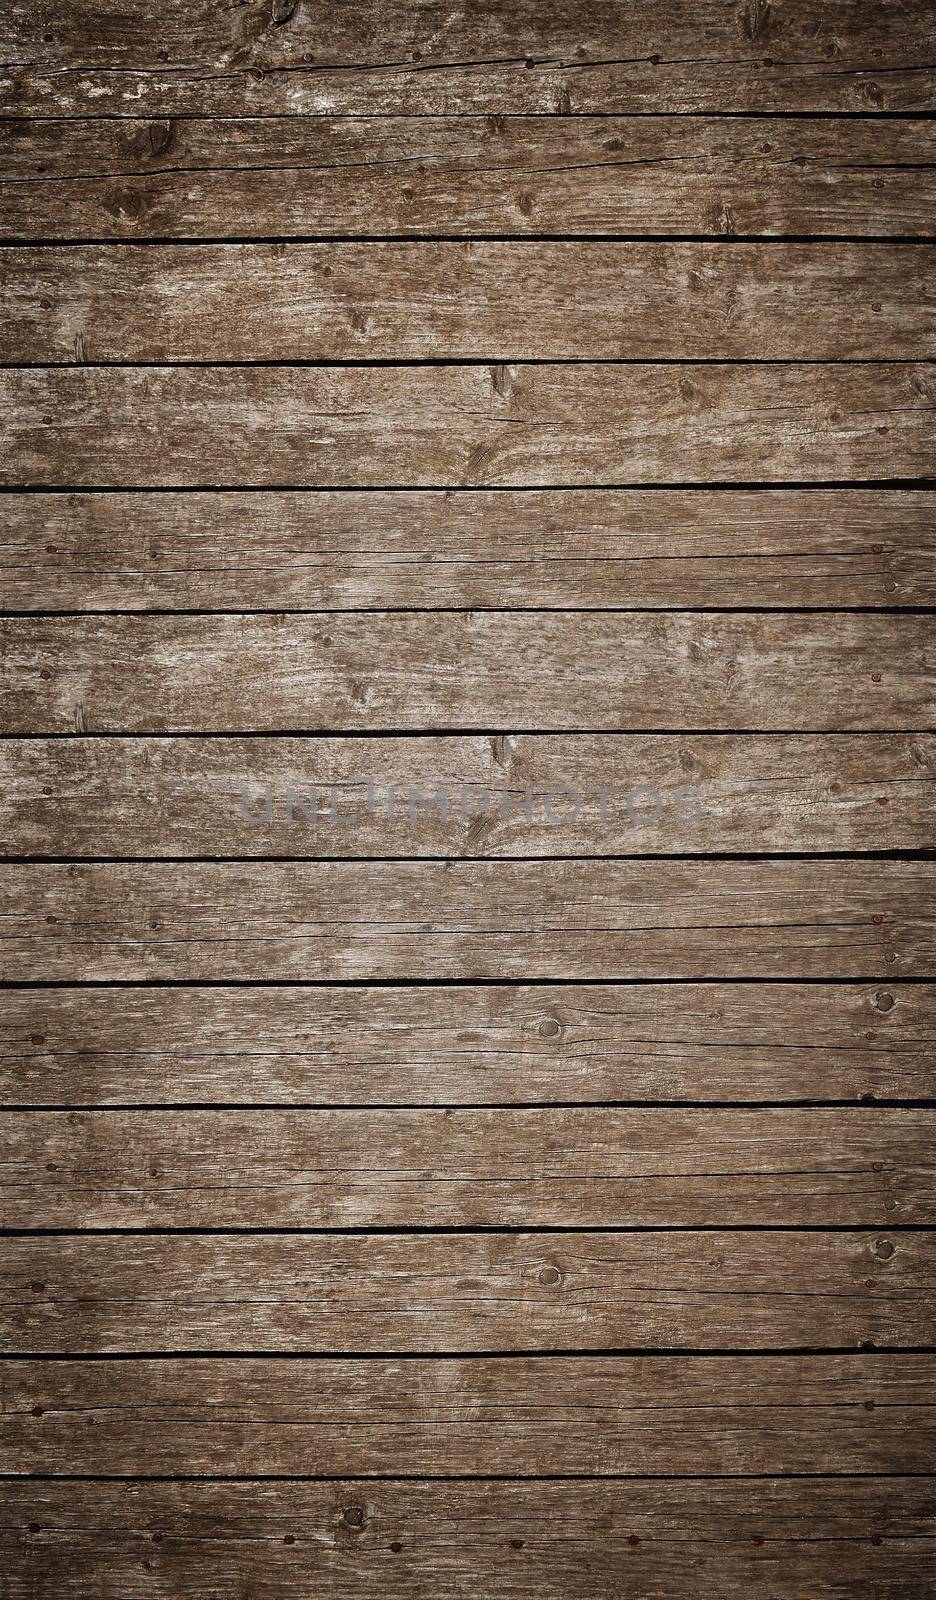 Old brown vintage rustic weathered wooden fence planks background